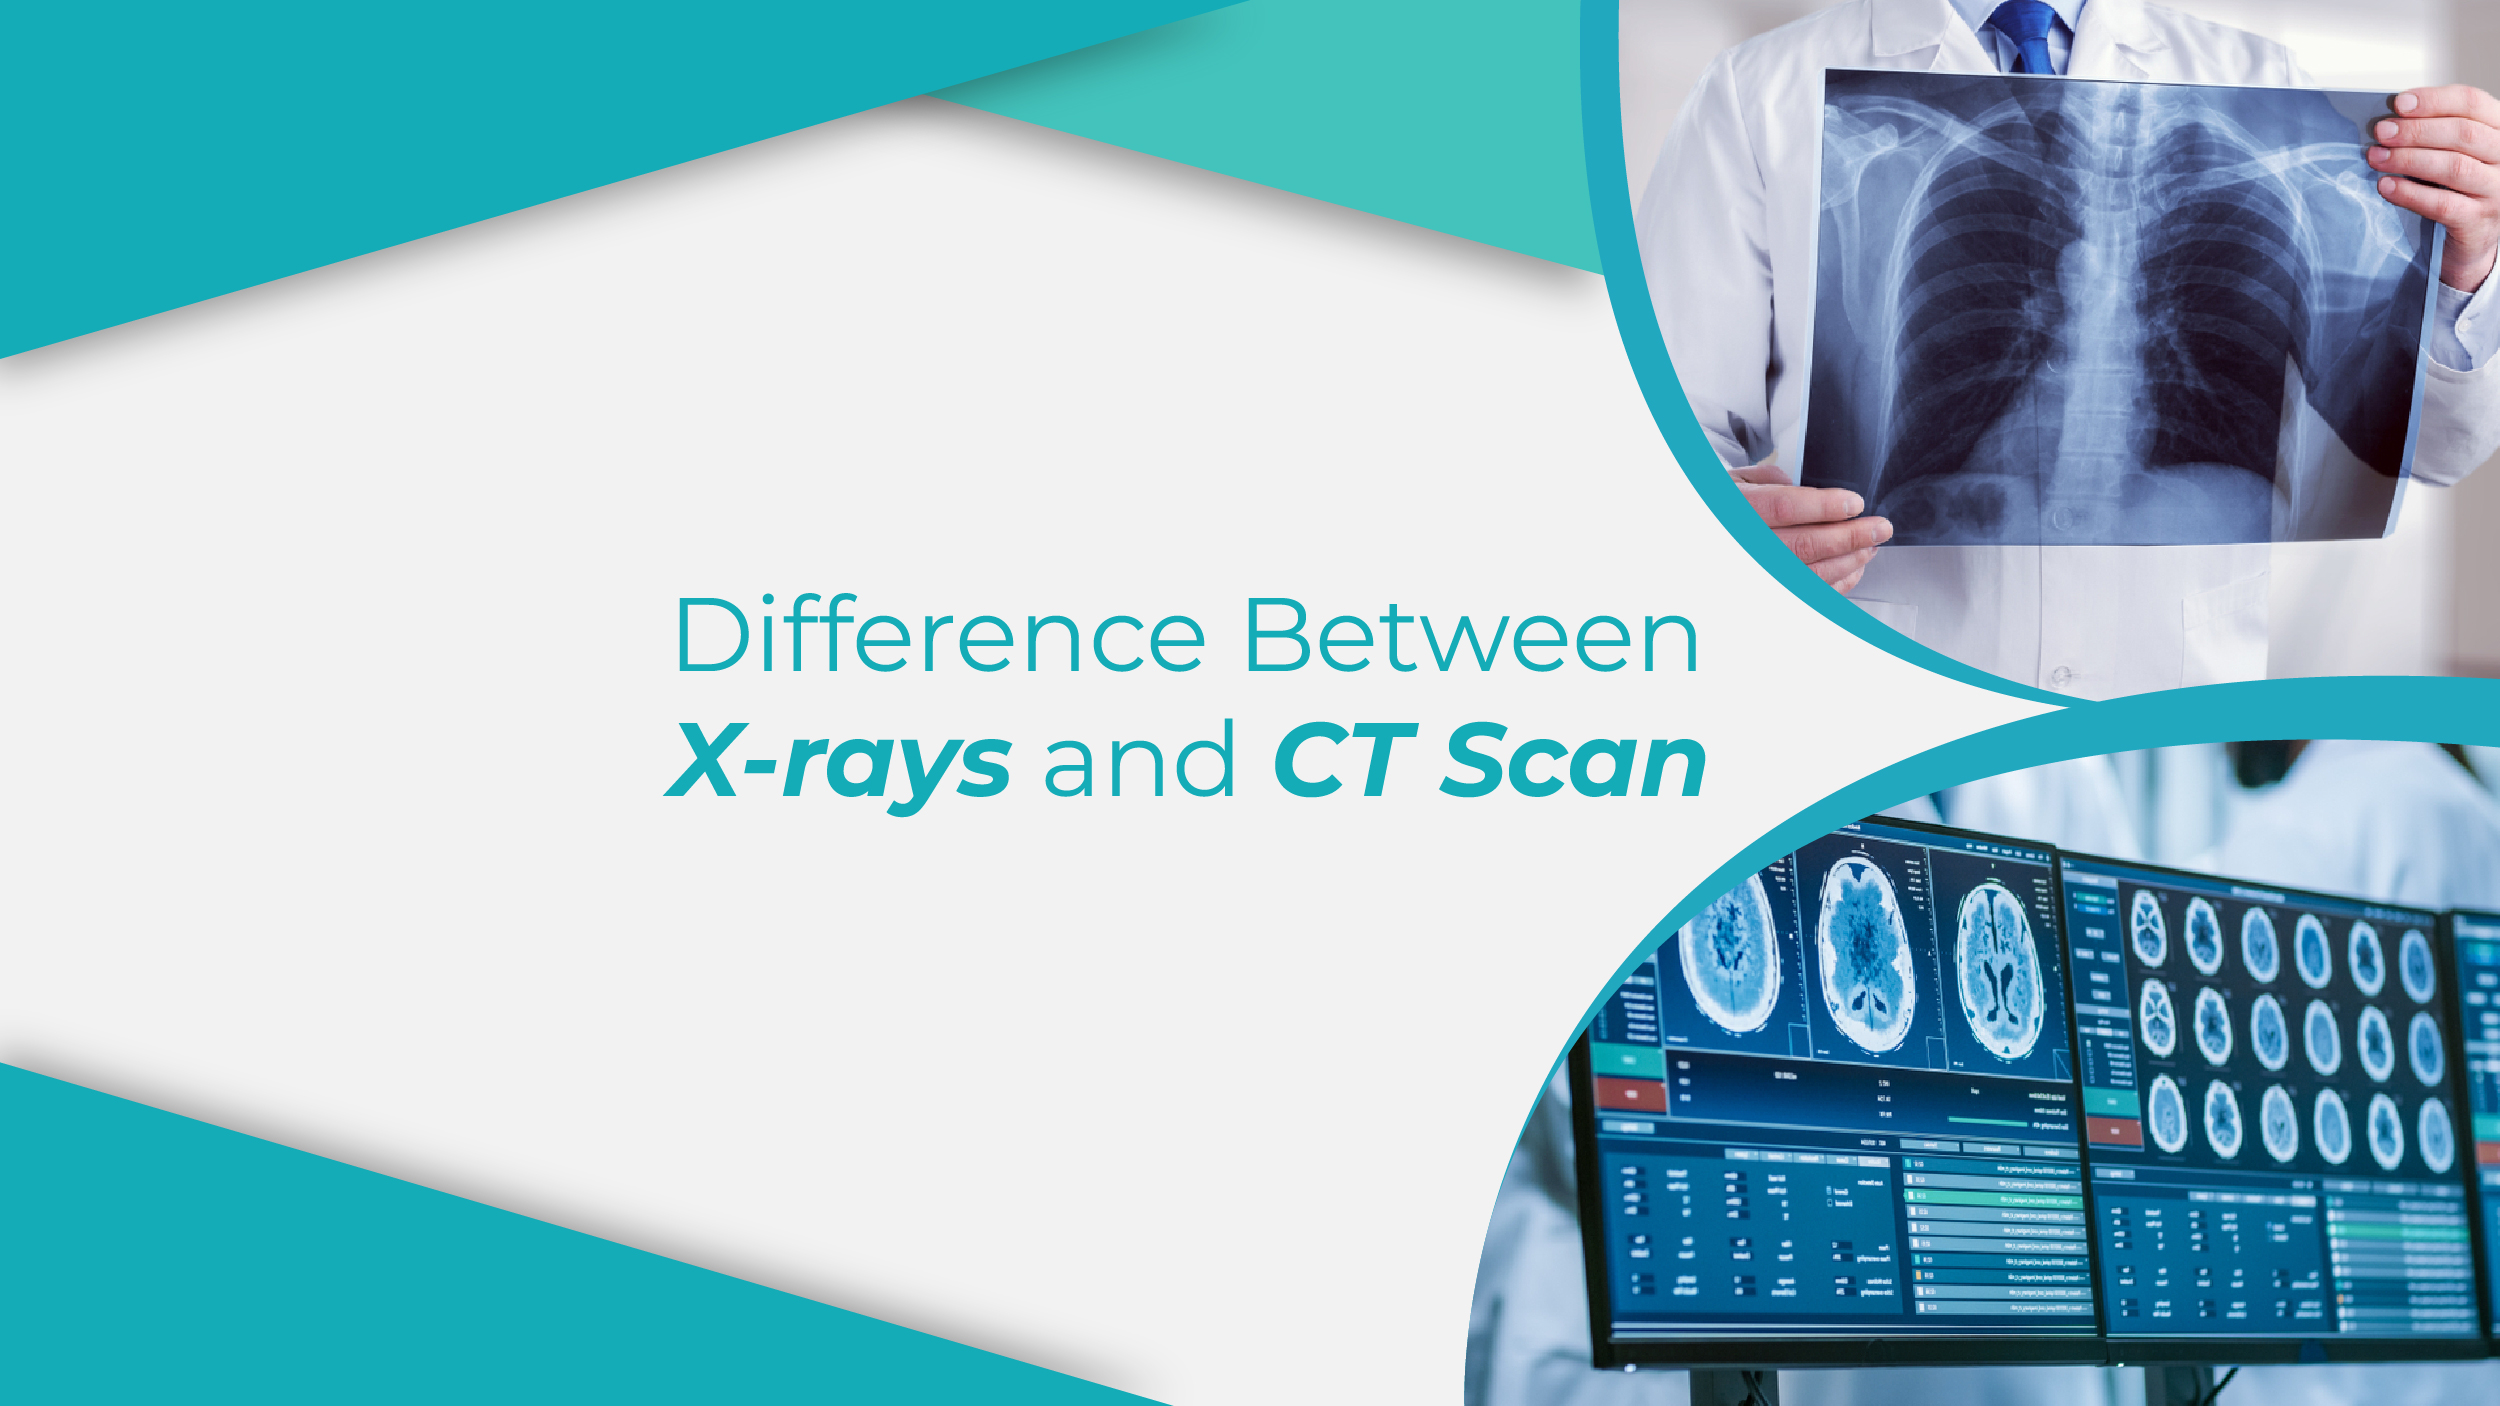 Difference between X-rays and CT scans